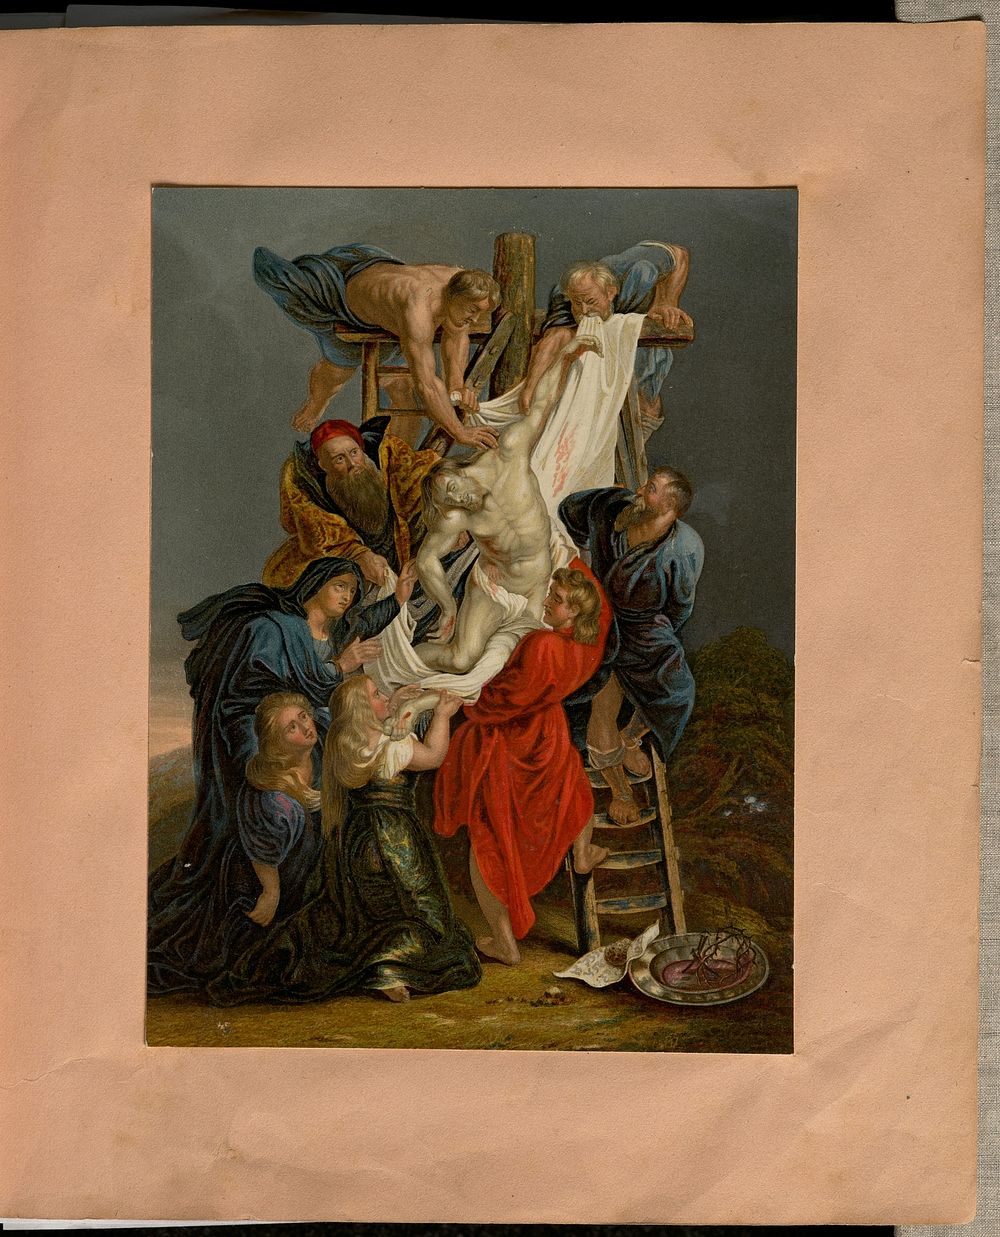 Lowering Christ from the Cross